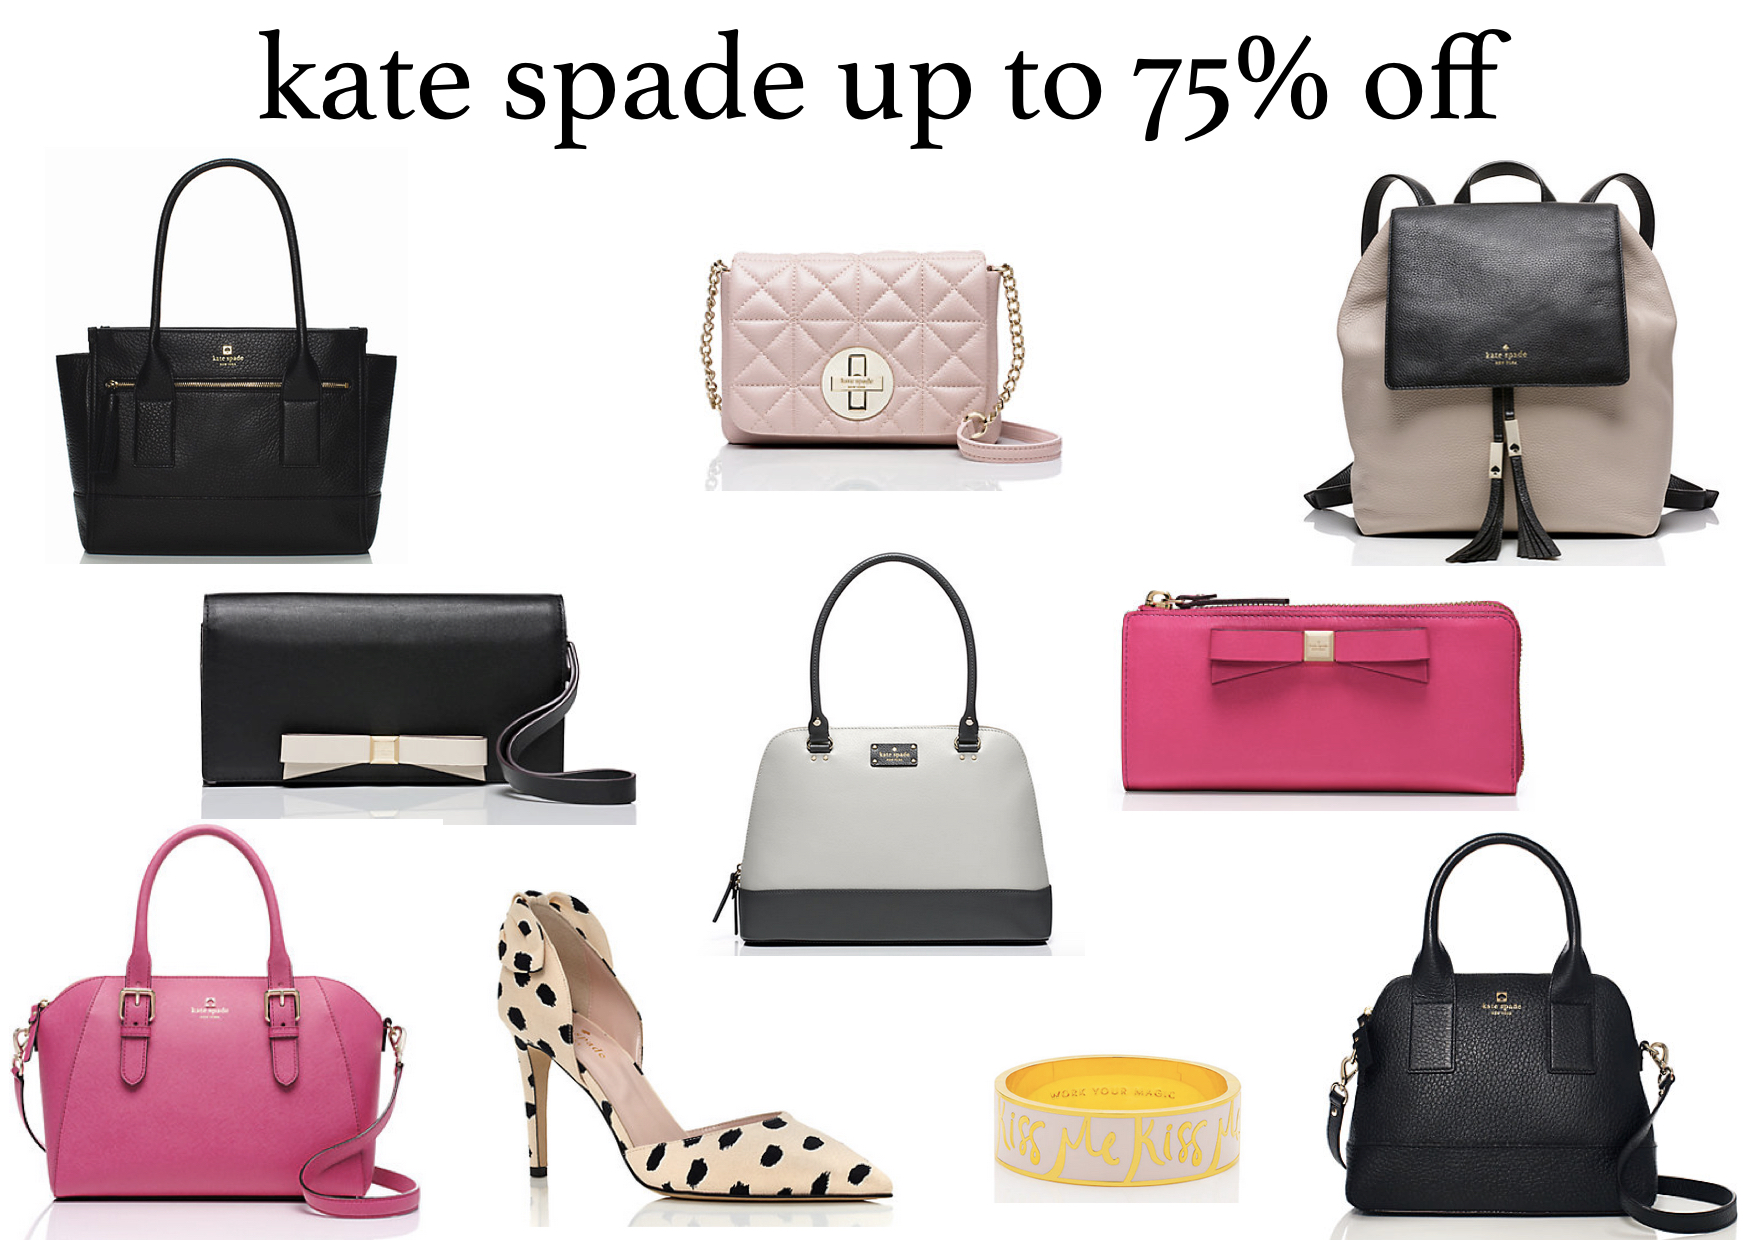 kate spade sale {up to 75% off!} - GLAMOURITA